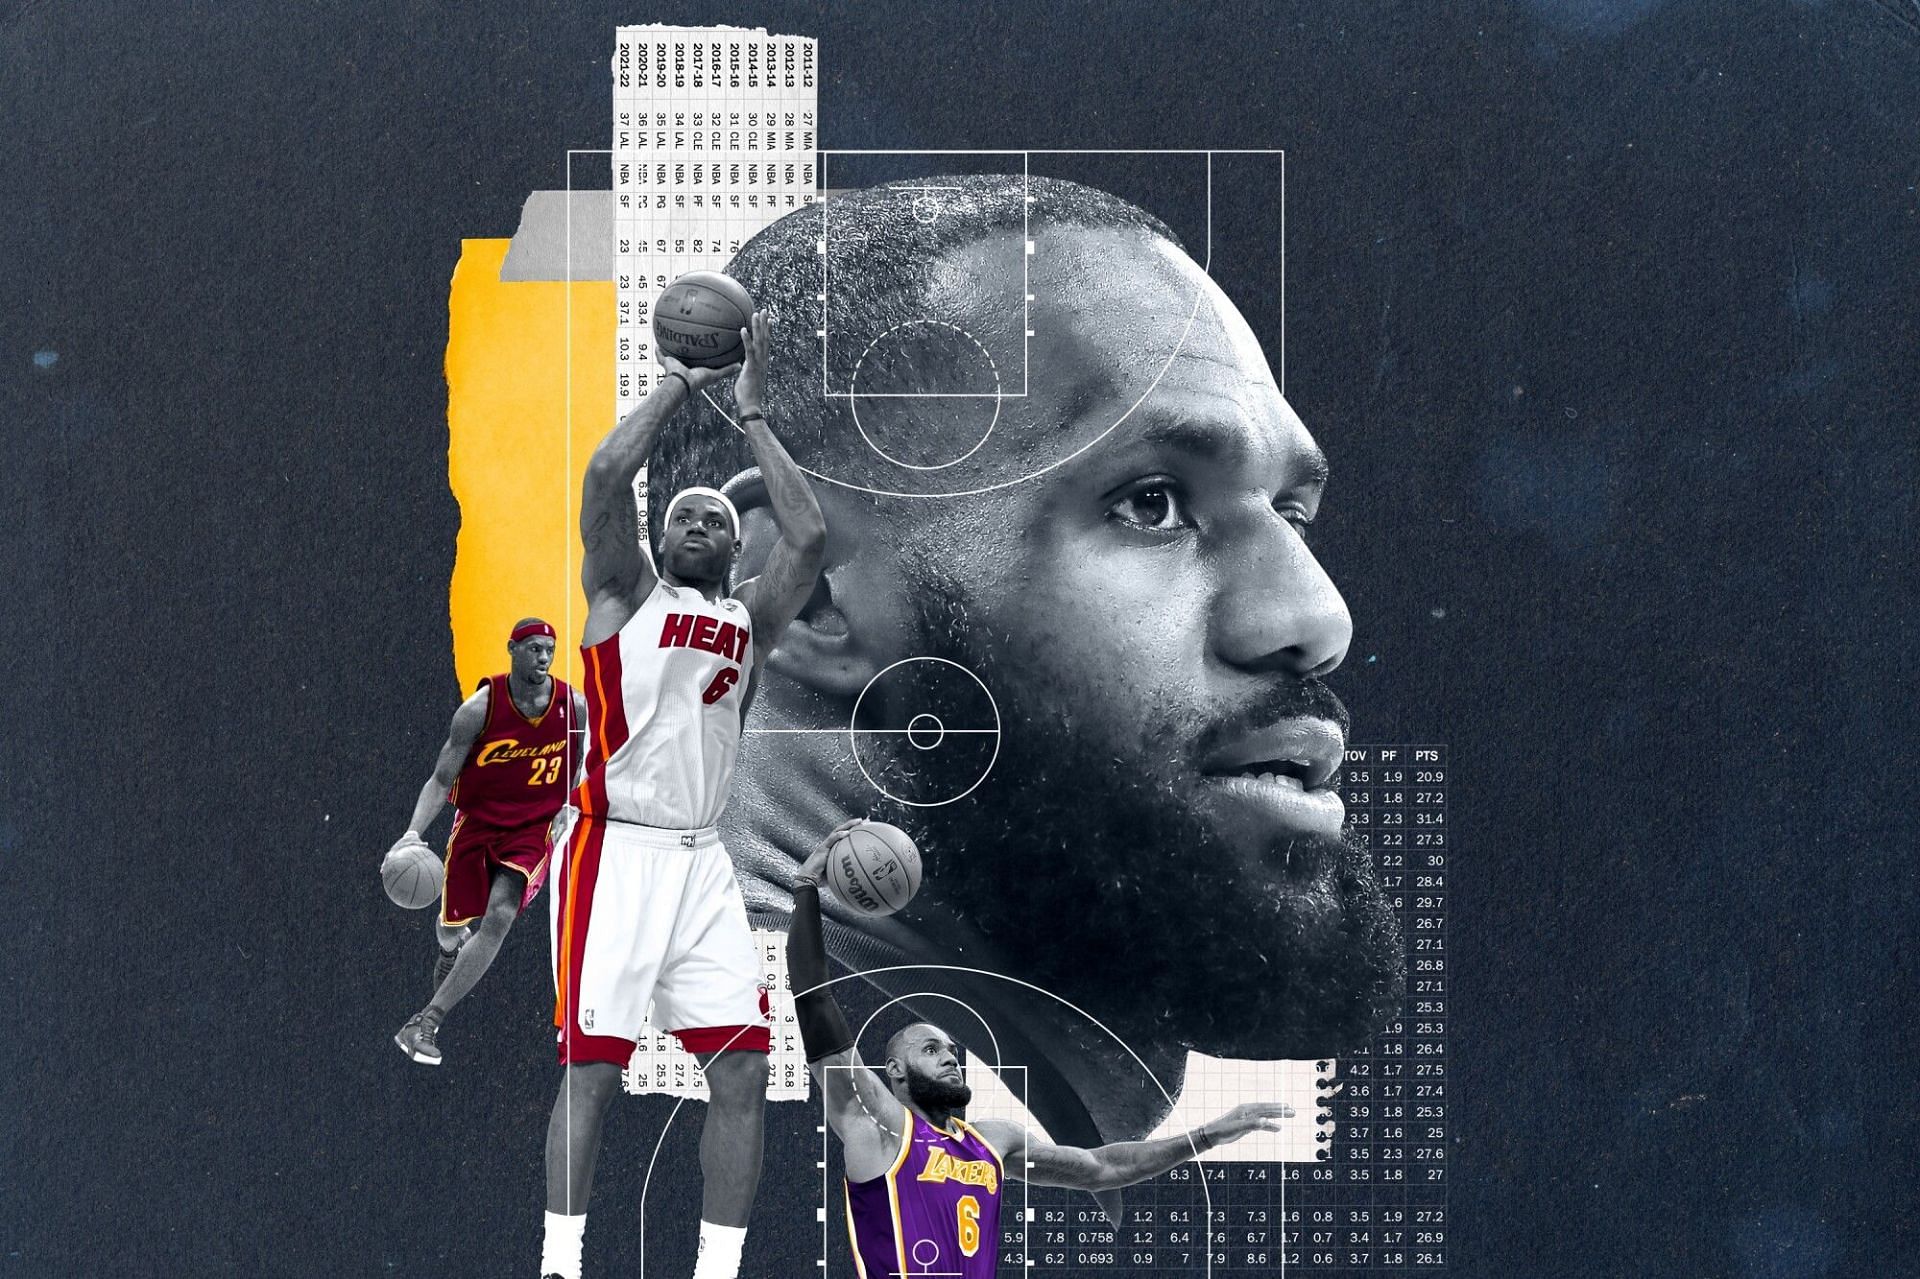 Los Angeles Lakers LeBron James 2019-20 shirt Number 6 away  Lebron james  lakers, Lebron james, Lebron james wallpapers